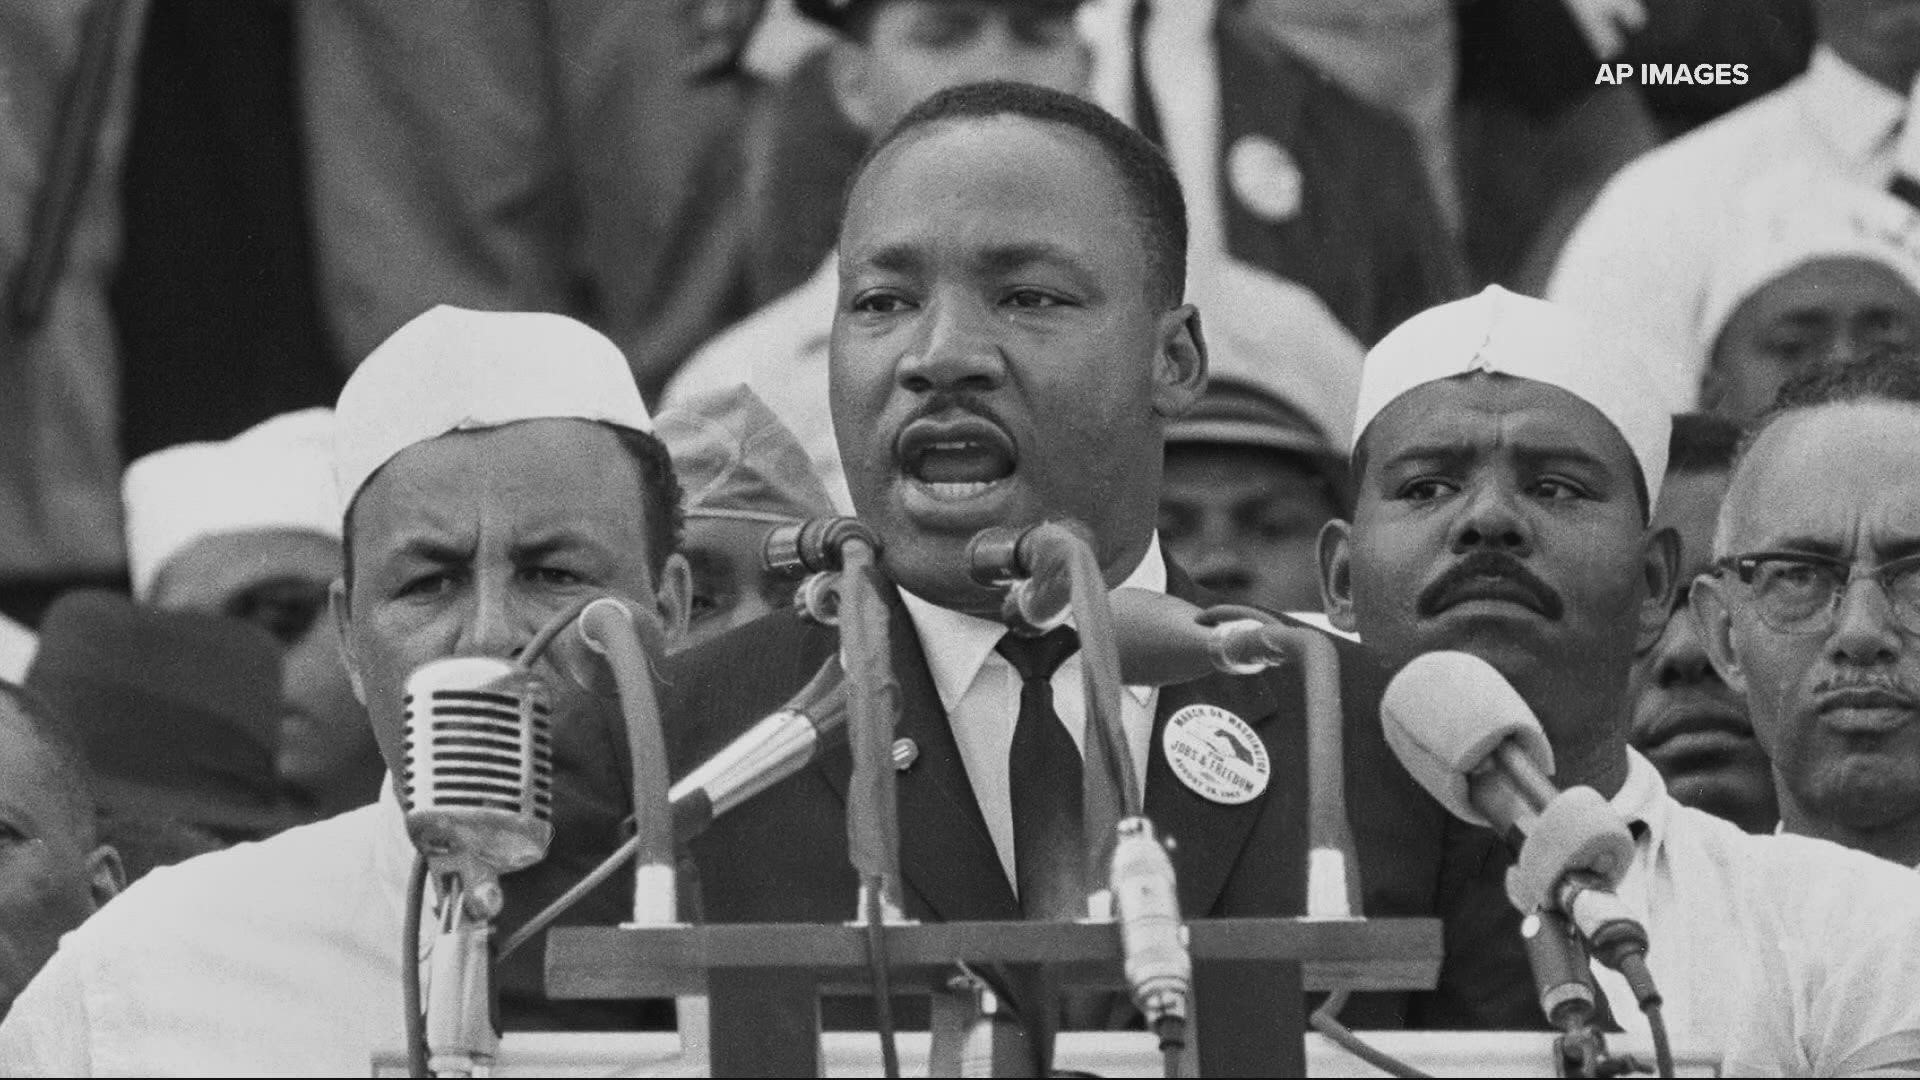 Portlanders speak on what MLK day means to him and how they honor his legacy.